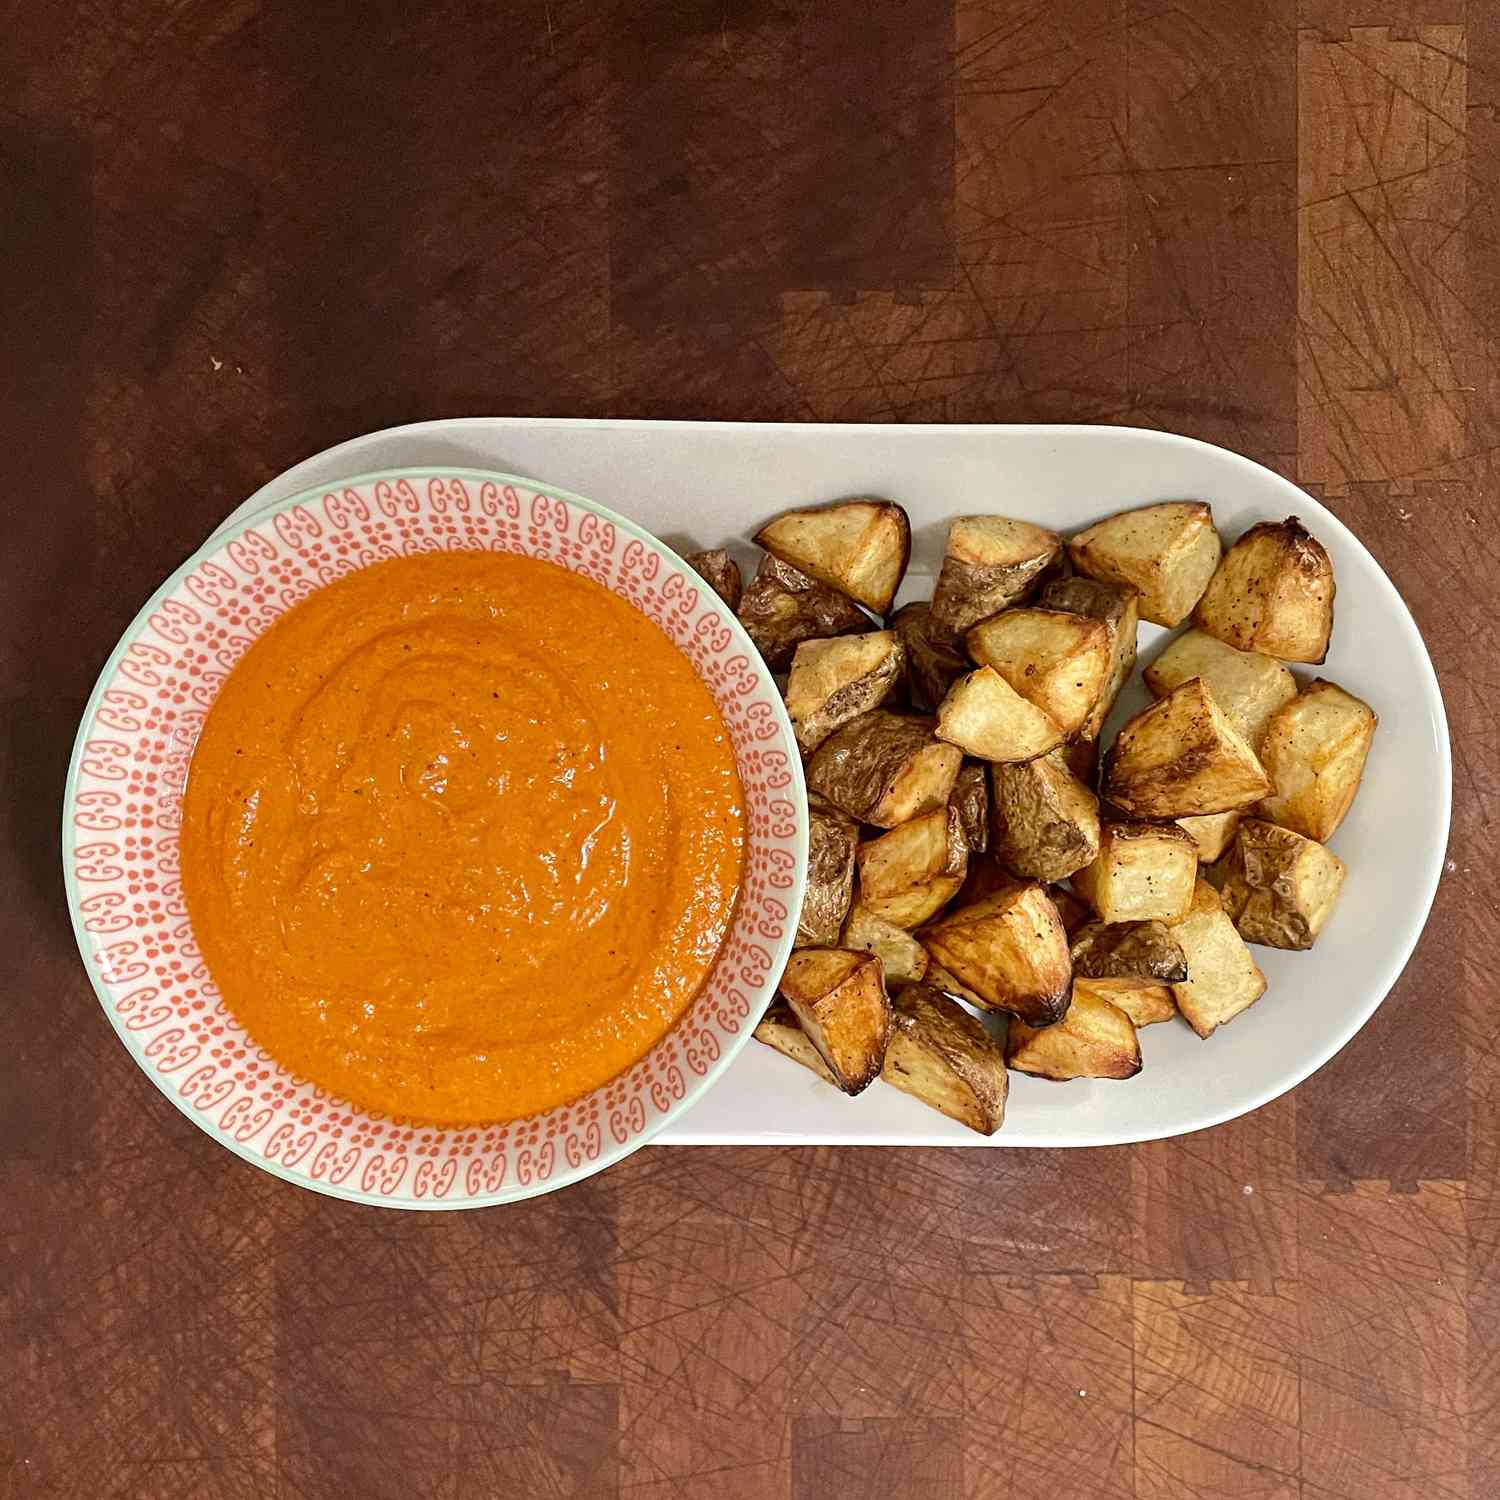 An oblong plate with browned cubed patatas bravas on the right side and a bowl of red romsesco sauce on the left